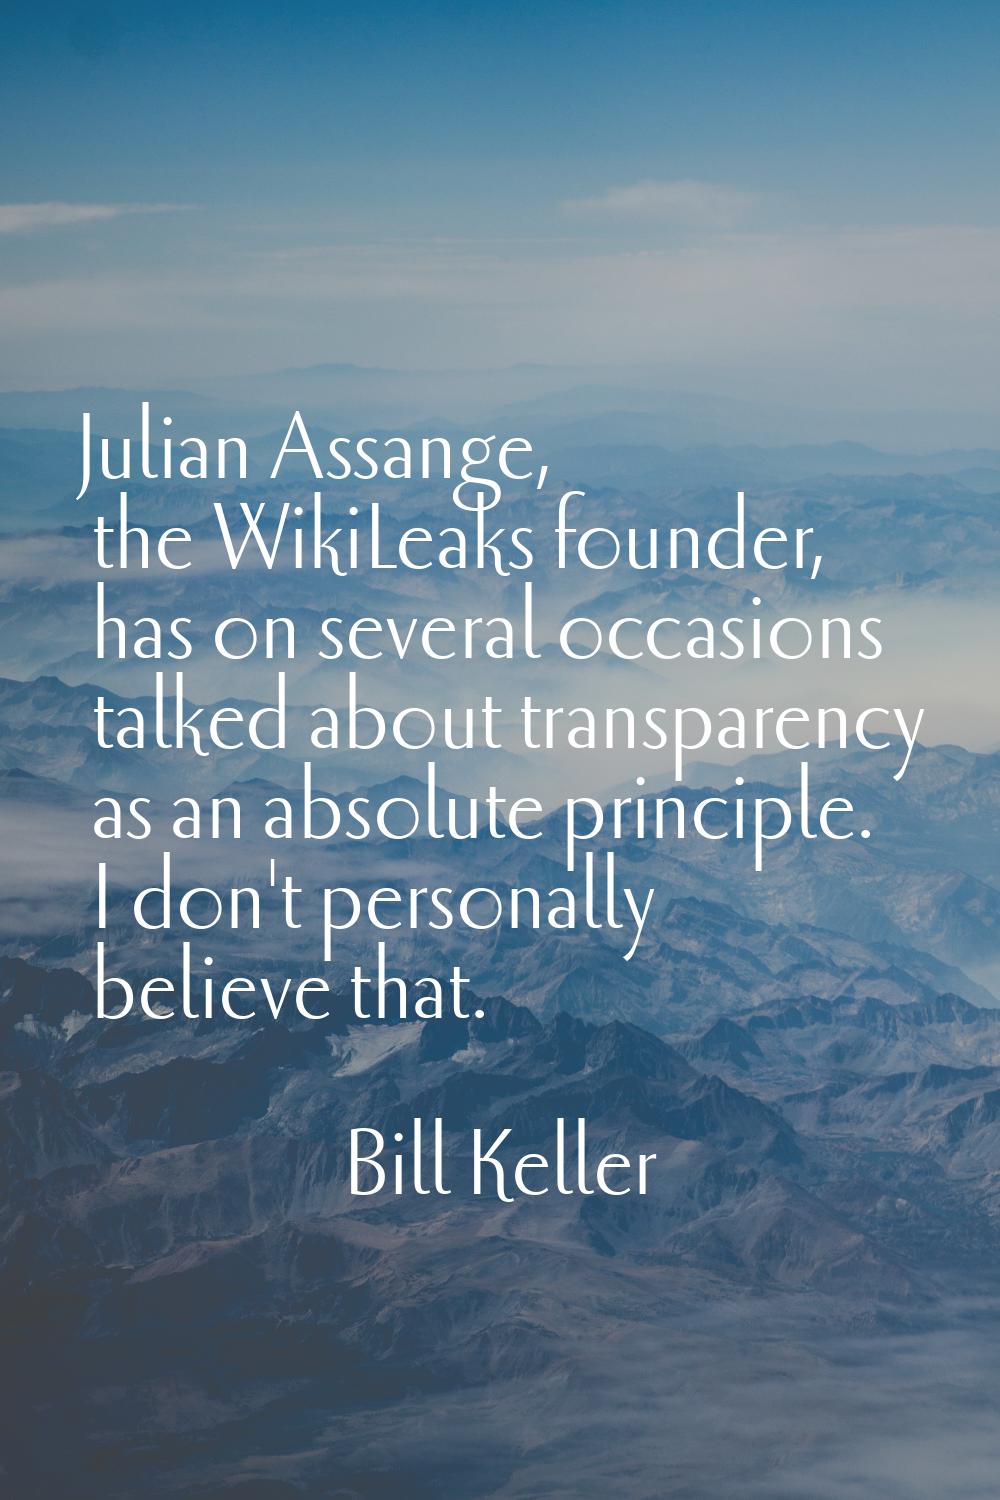 Julian Assange, the WikiLeaks founder, has on several occasions talked about transparency as an abs